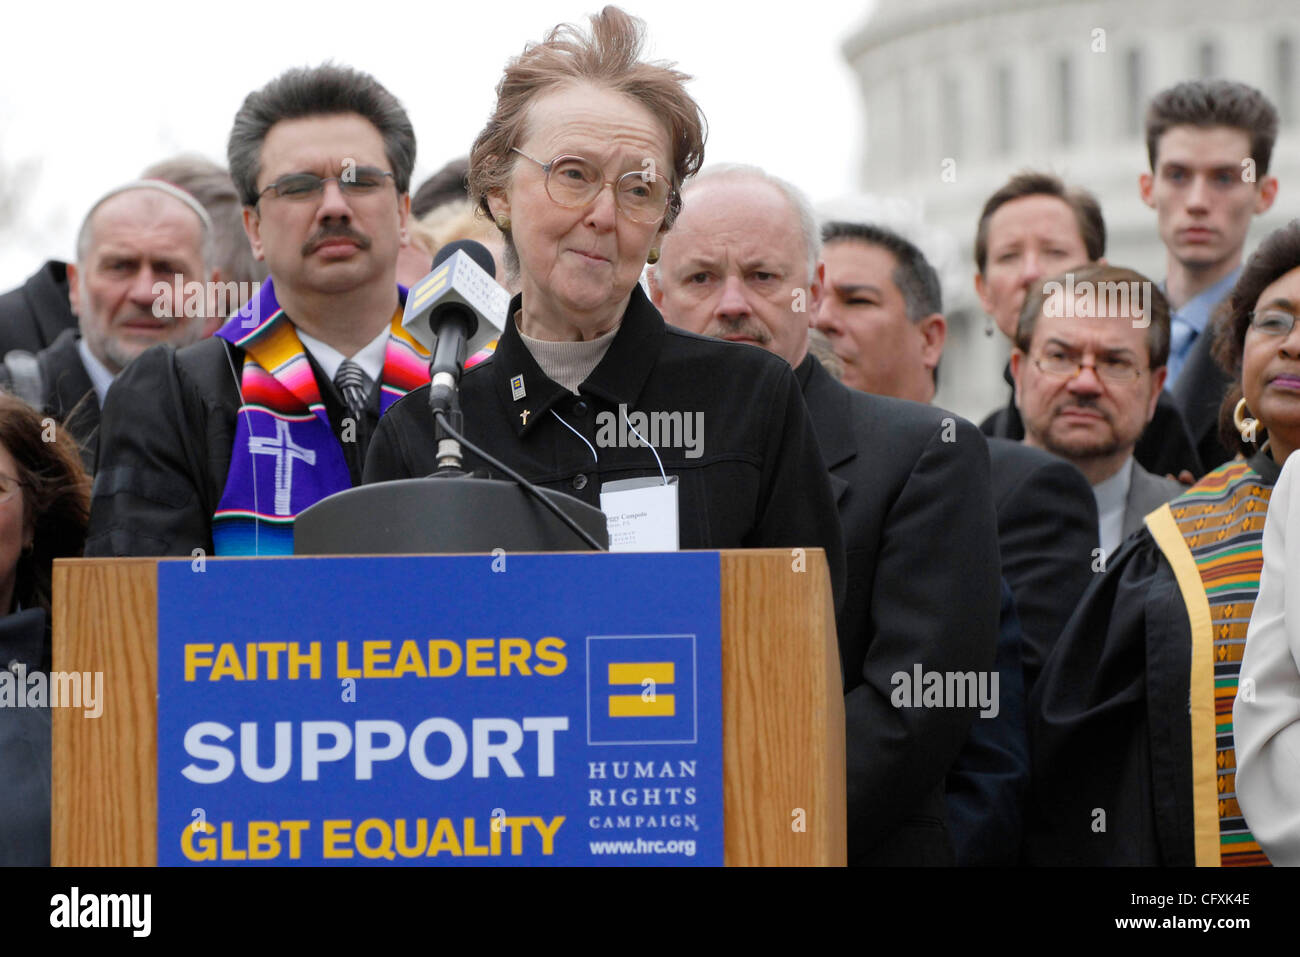 Apr 17, 2007 - Washington, DC, USA - Evangelical Christian leader PEGGY CAMPOLO speaks before 220 other religious leaders from around the United States near the Capitol to express support for anti-discrimination legislation, including the Matthew Shepard hate crime bill, being considered in Congress Stock Photo